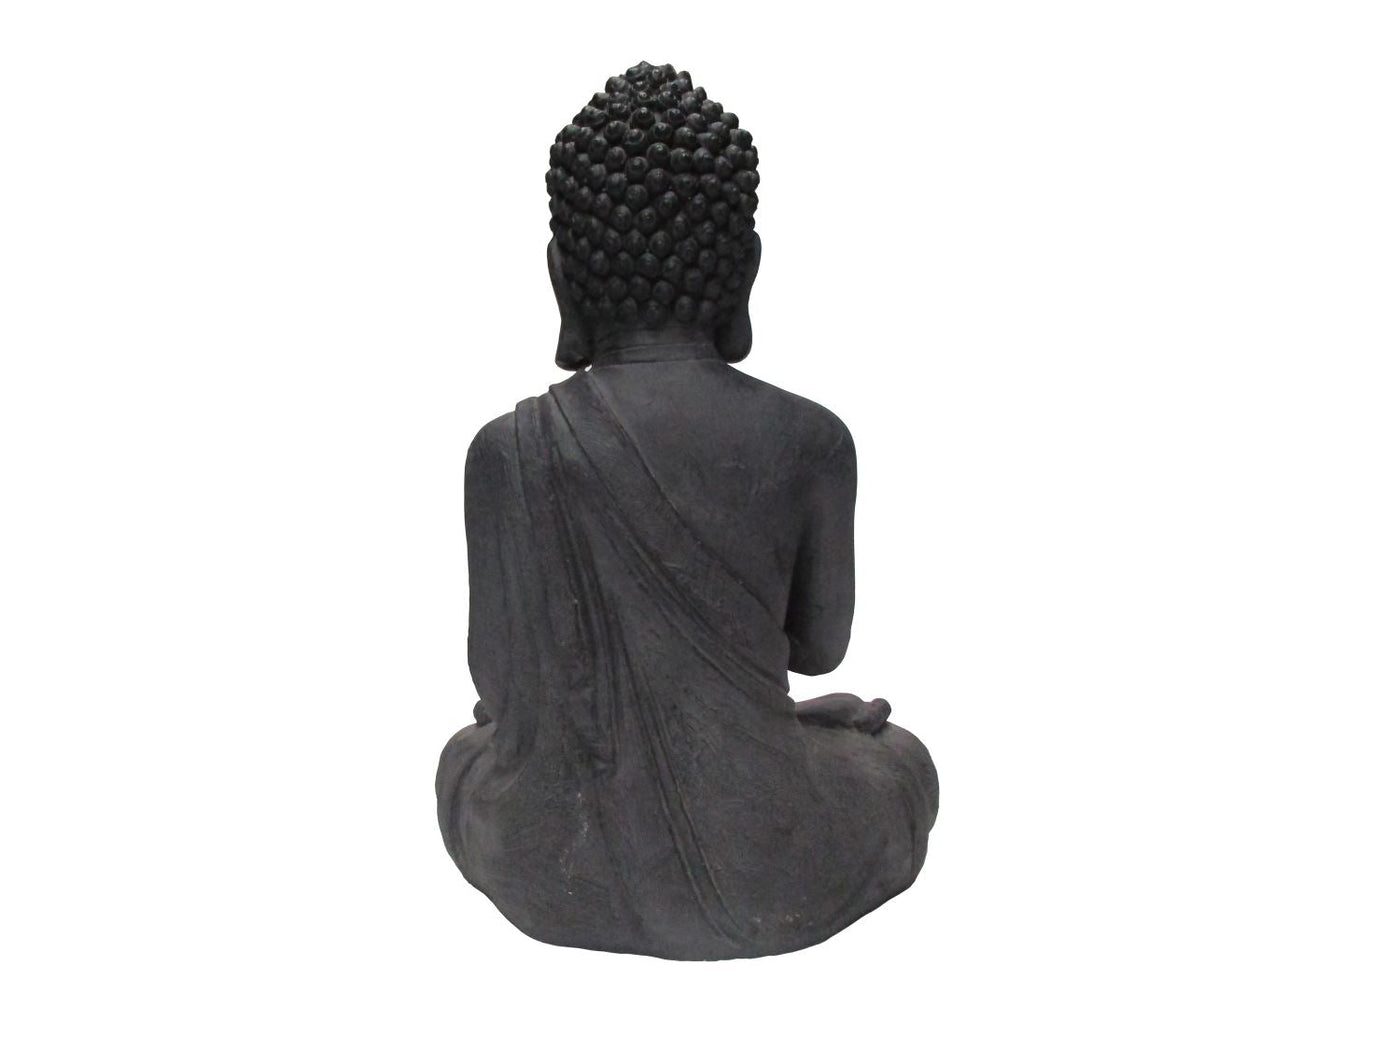 Tranquility Buddha Indoor/Outdoor Statue - Black